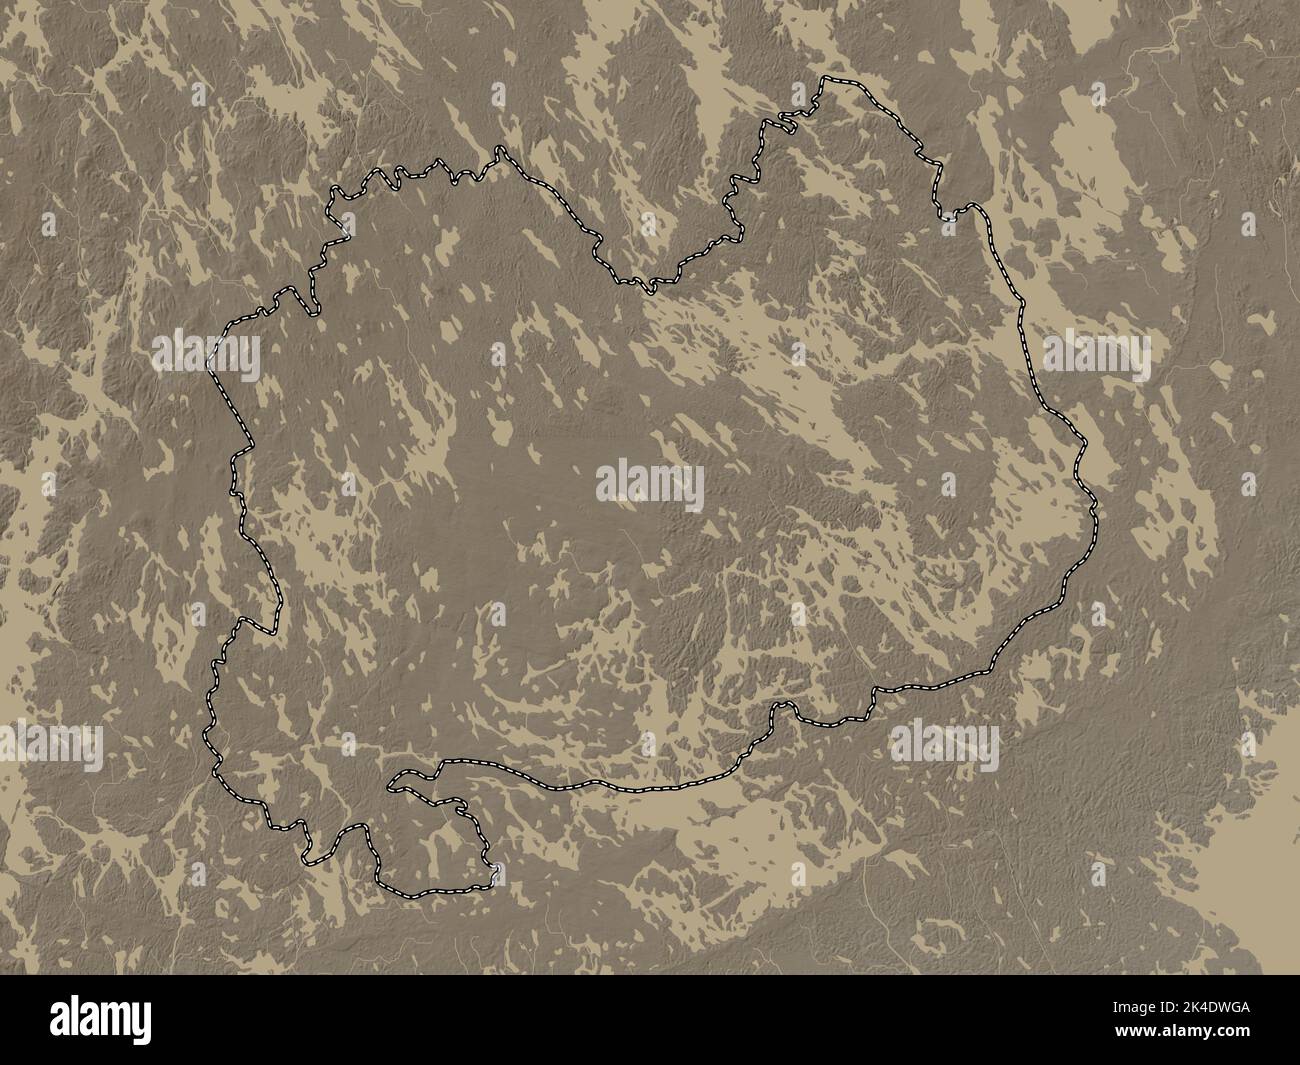 Southern Savonia, region of Finland. Elevation map colored in sepia tones with lakes and rivers Stock Photo